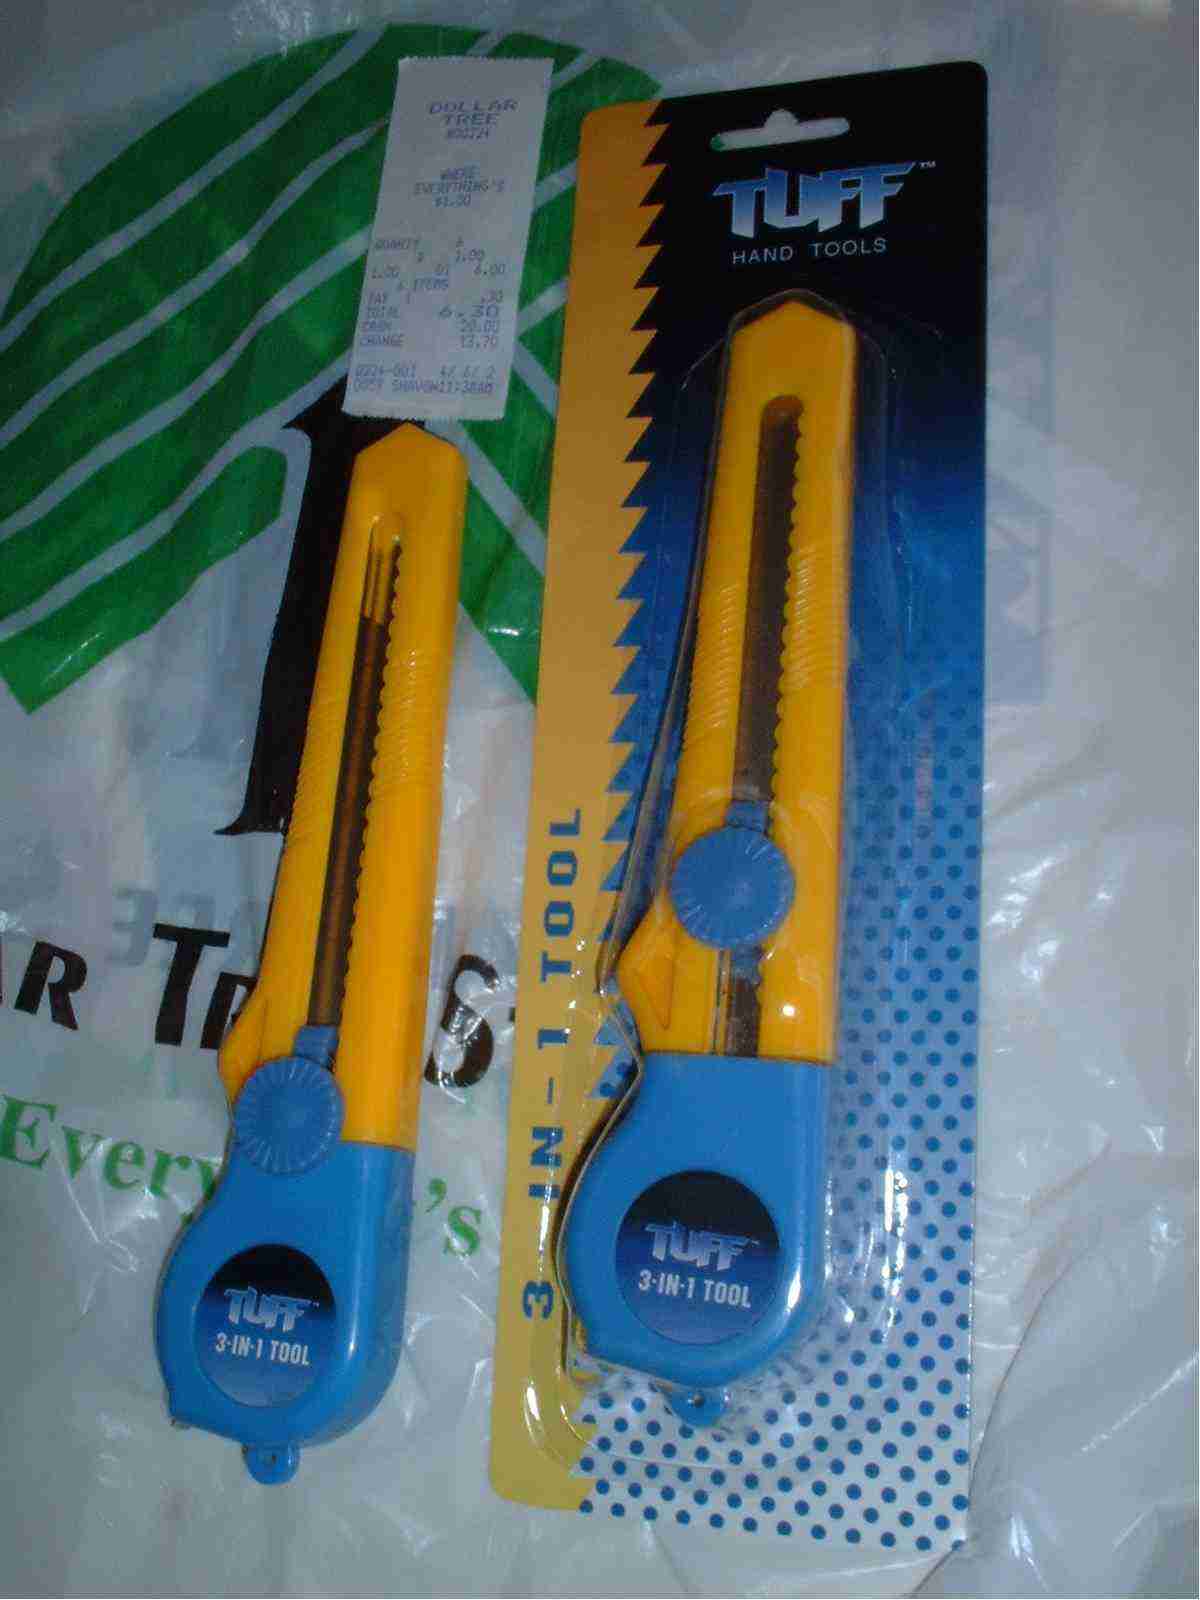 The 3-in-1 Tool, both in original packing and unwrapped, on top of its Dollar Tree bag